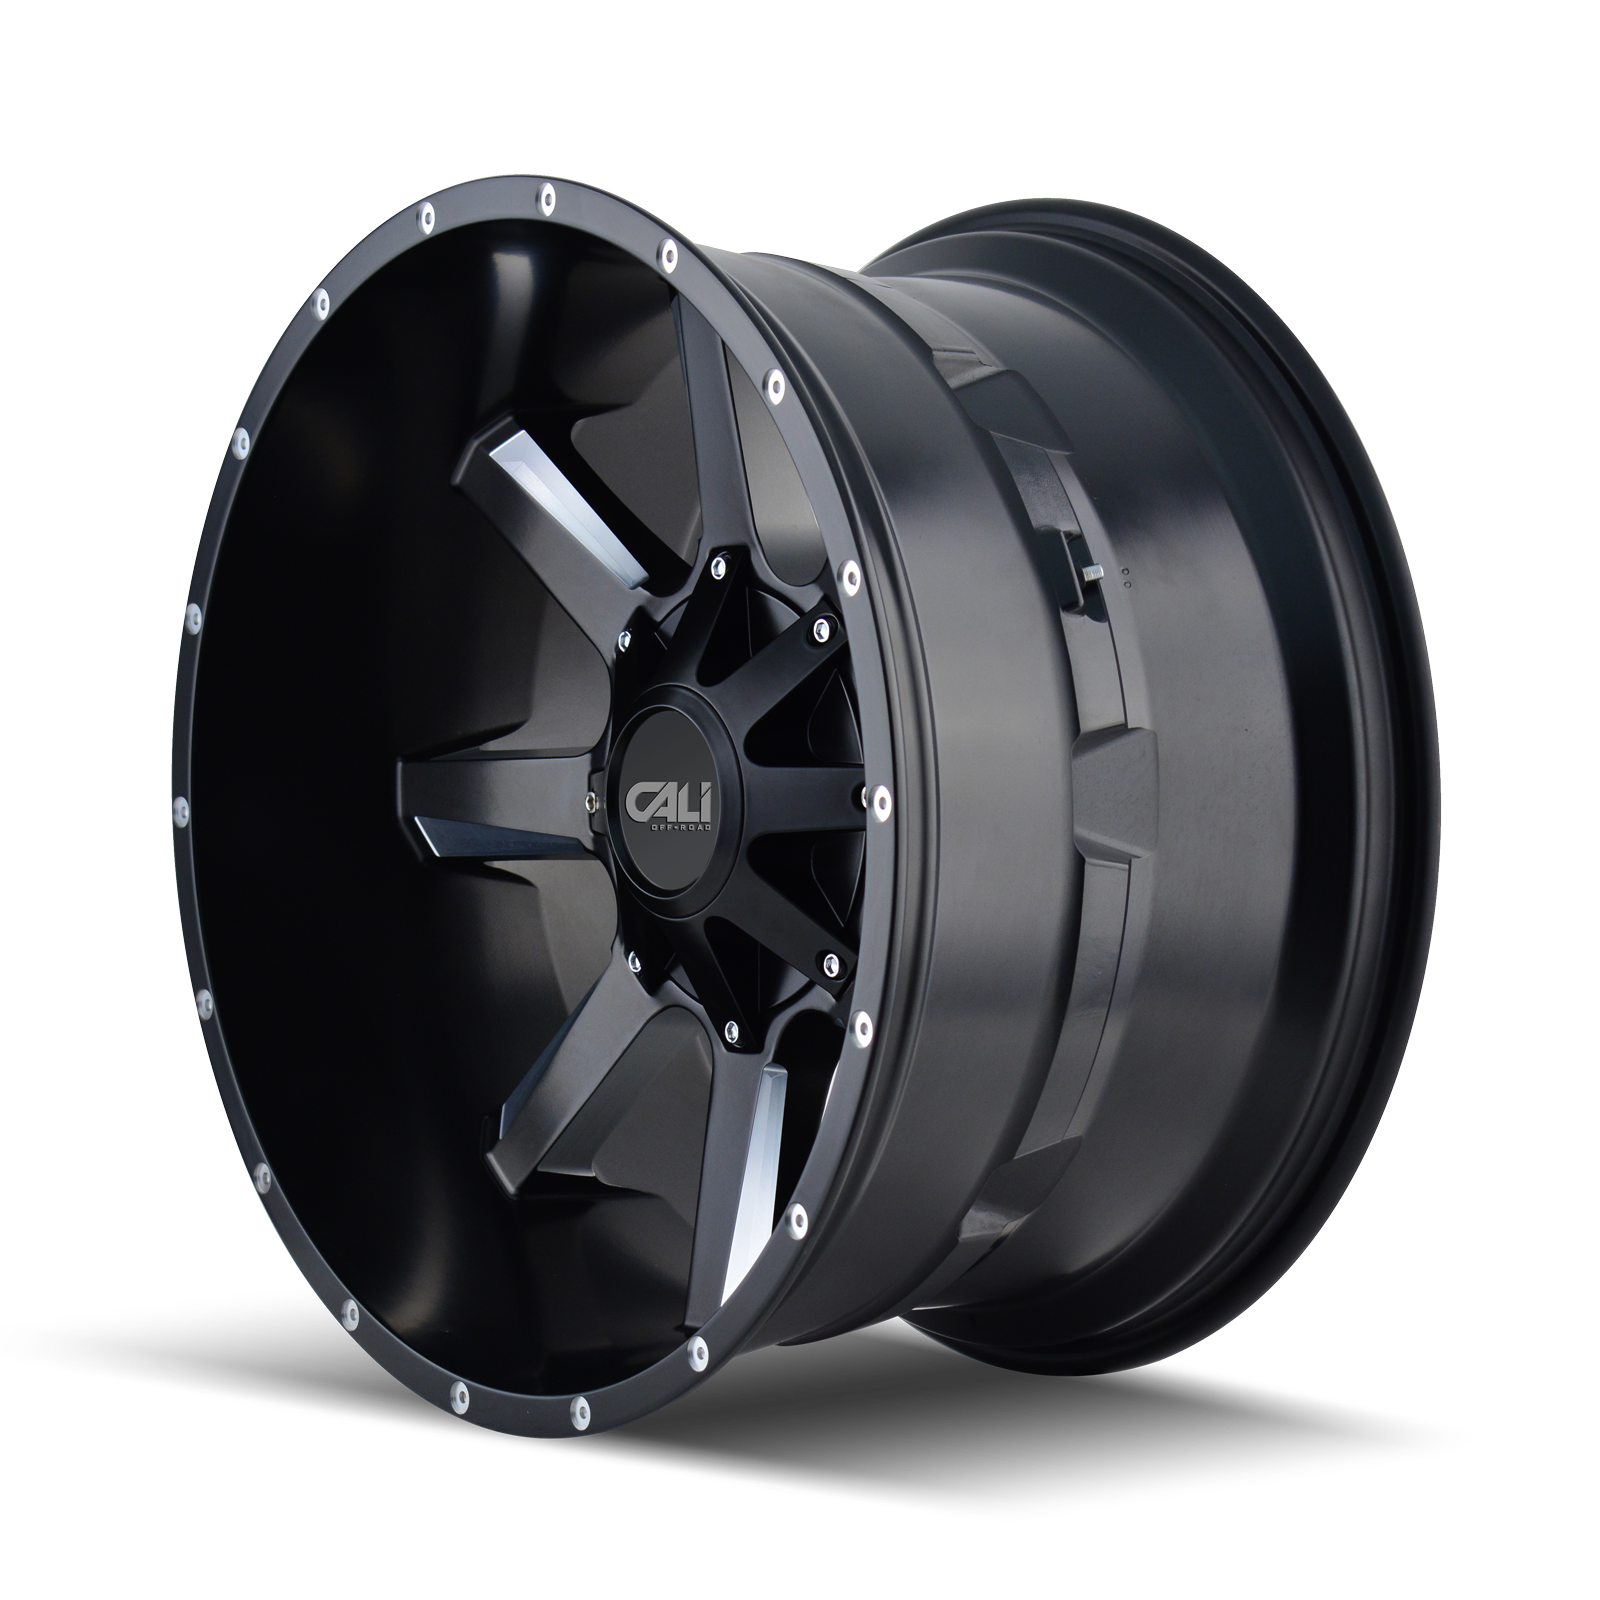 Cali Off-road BUSTED Satin black milled 20x9 0 8x180mm 124.1mm